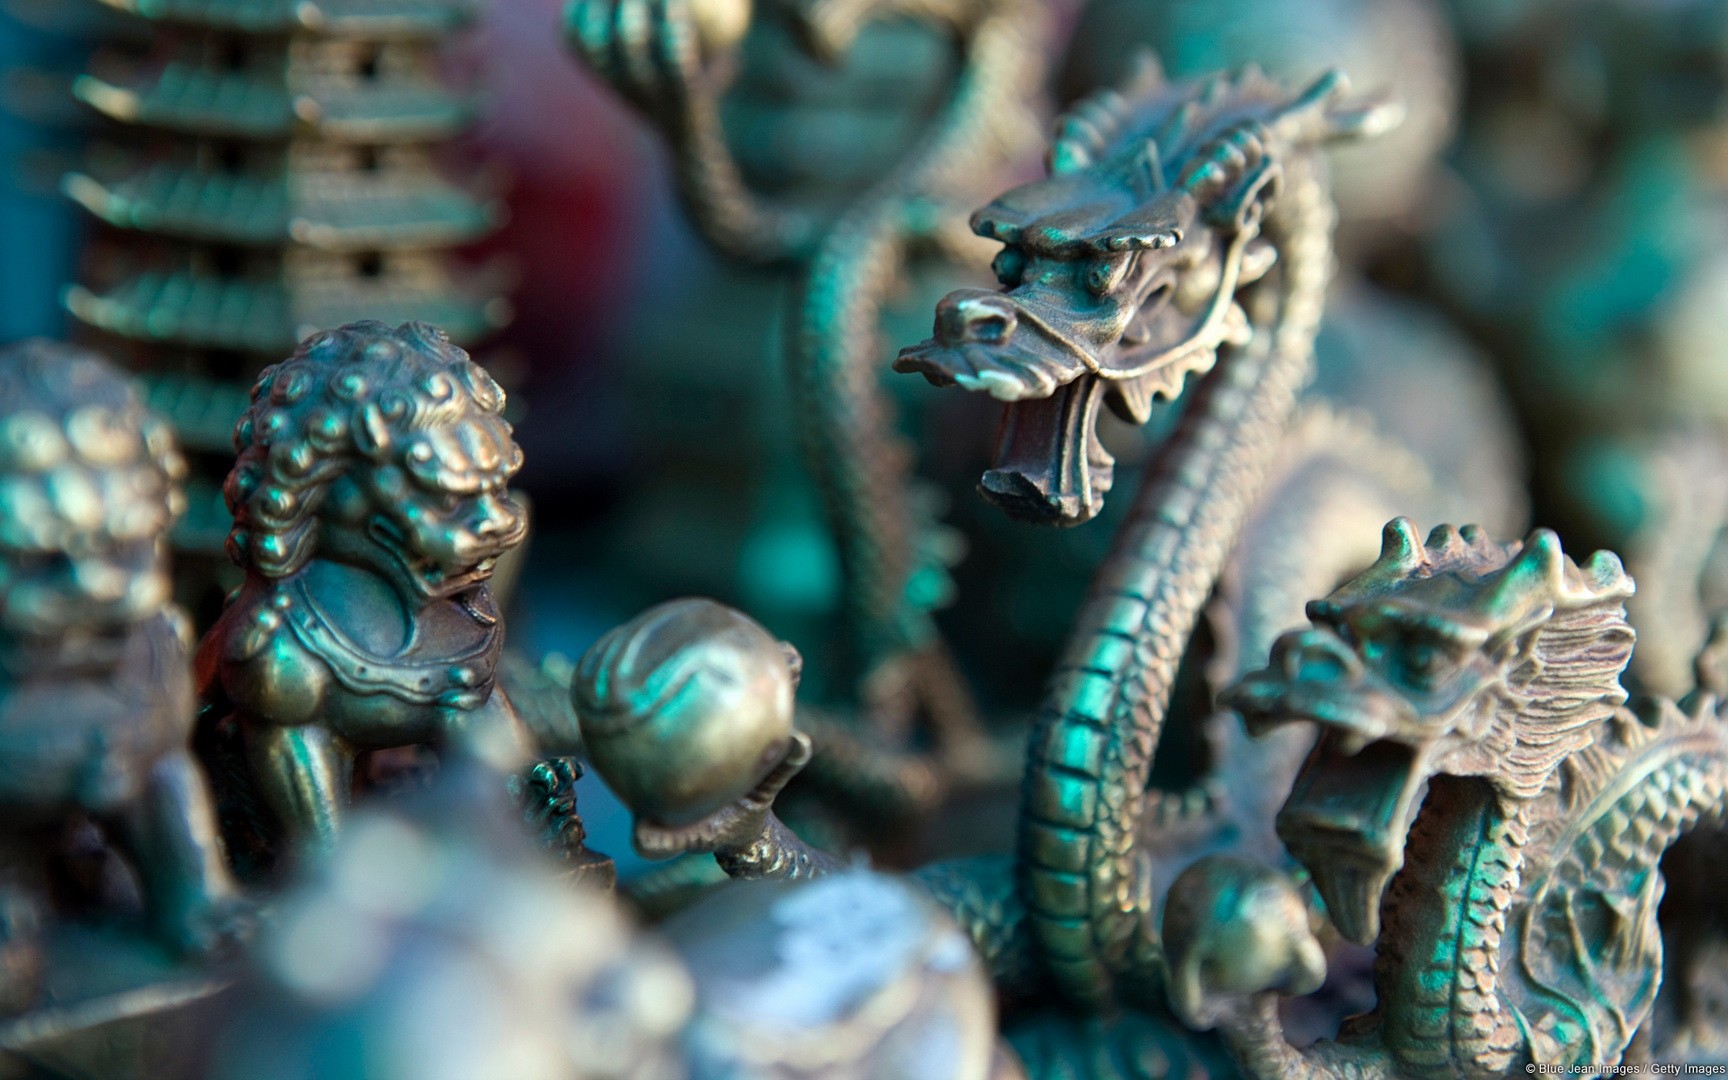 General 1728x1080 Chinese dragon dragon Asia turquoise